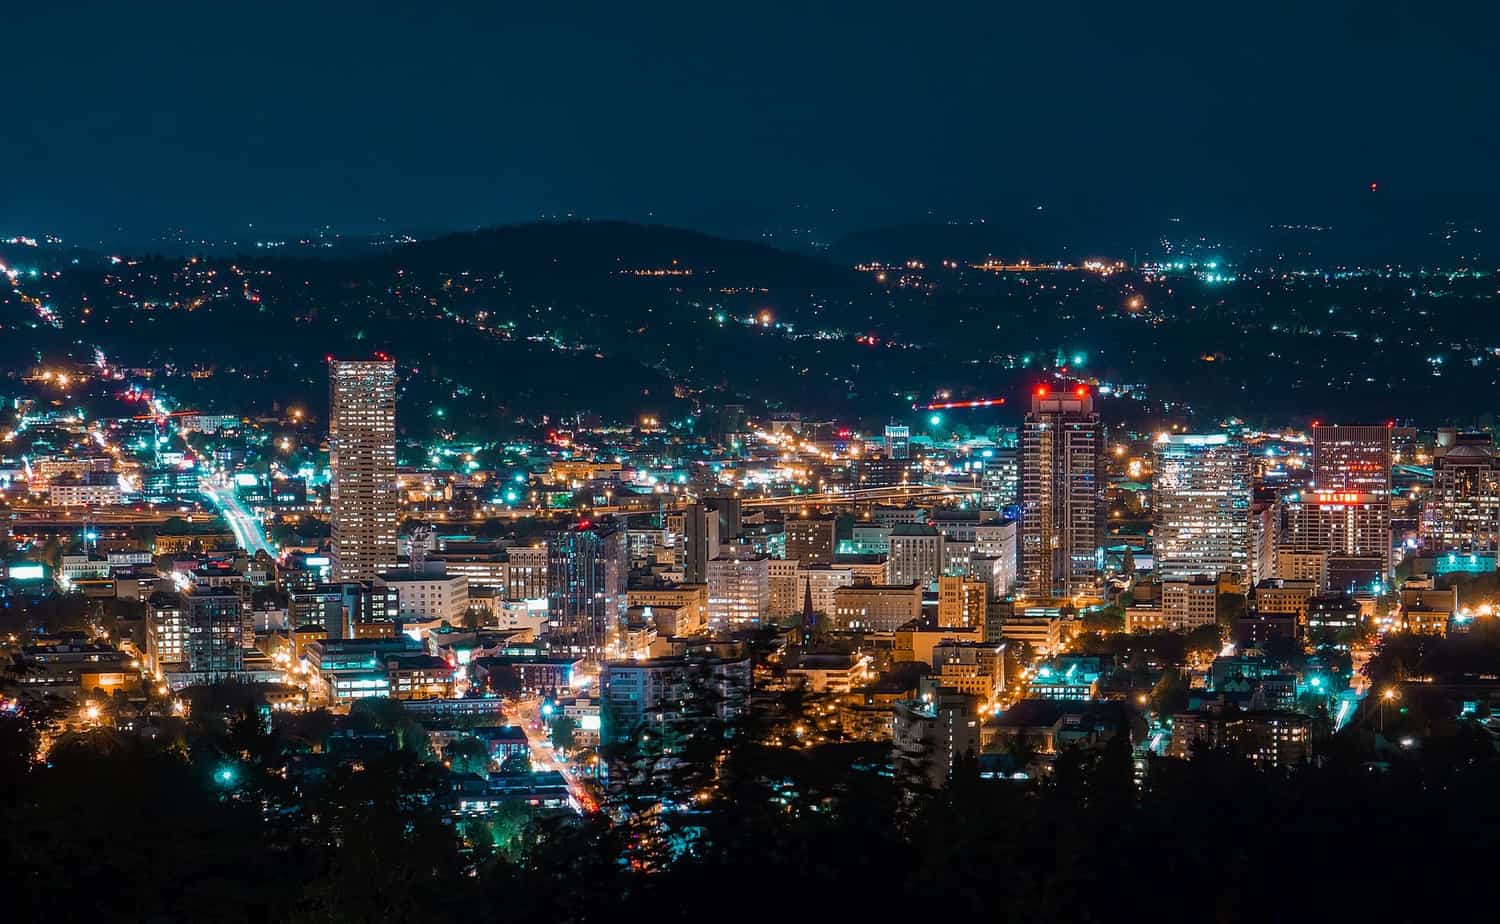 View of Portland lit up at night